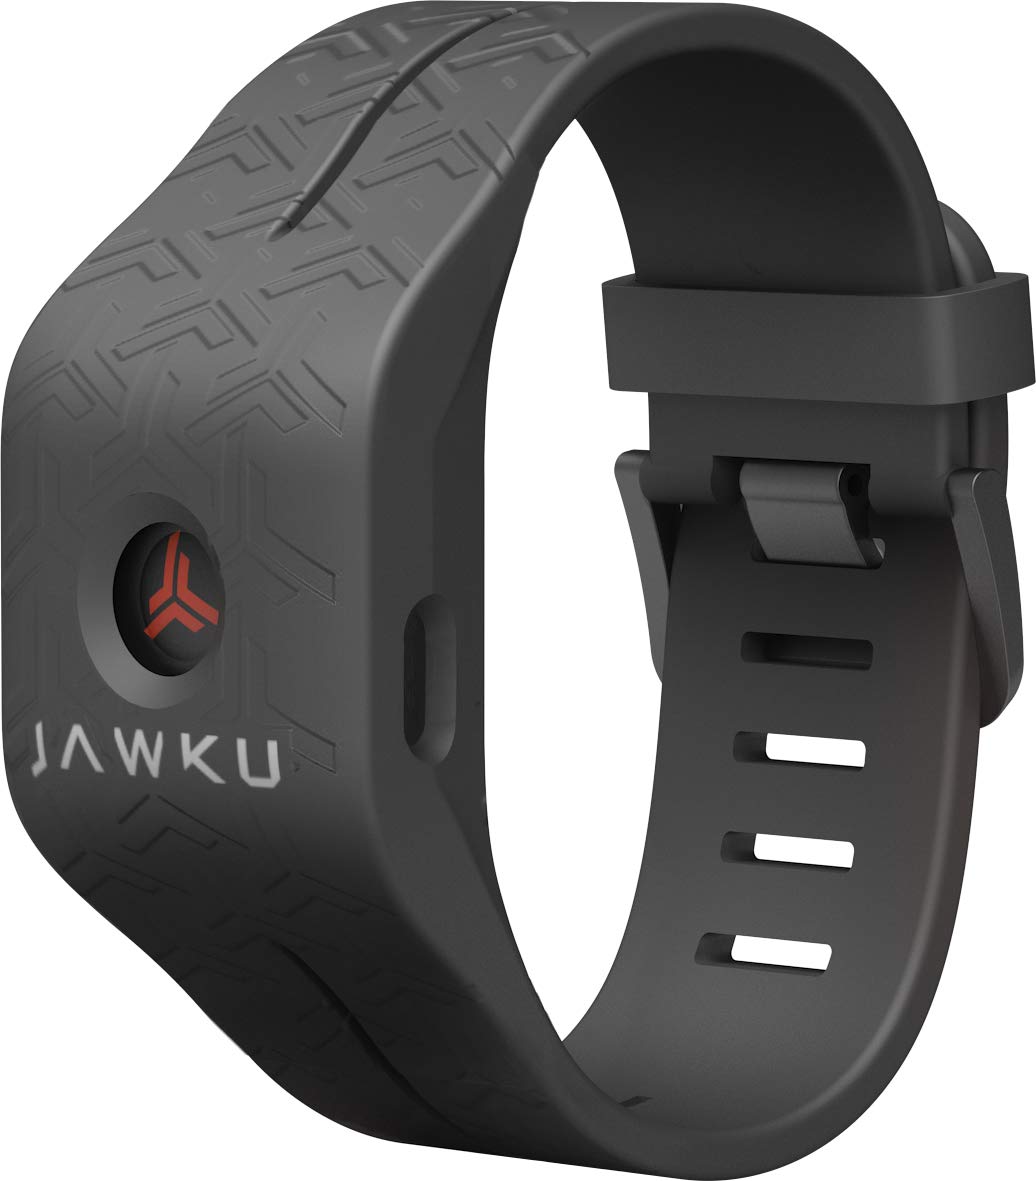 JAWKU Speed - The First Wearable to Measure Sprint Speed, Agility, Reaction Time/Test, Train and Track Performance